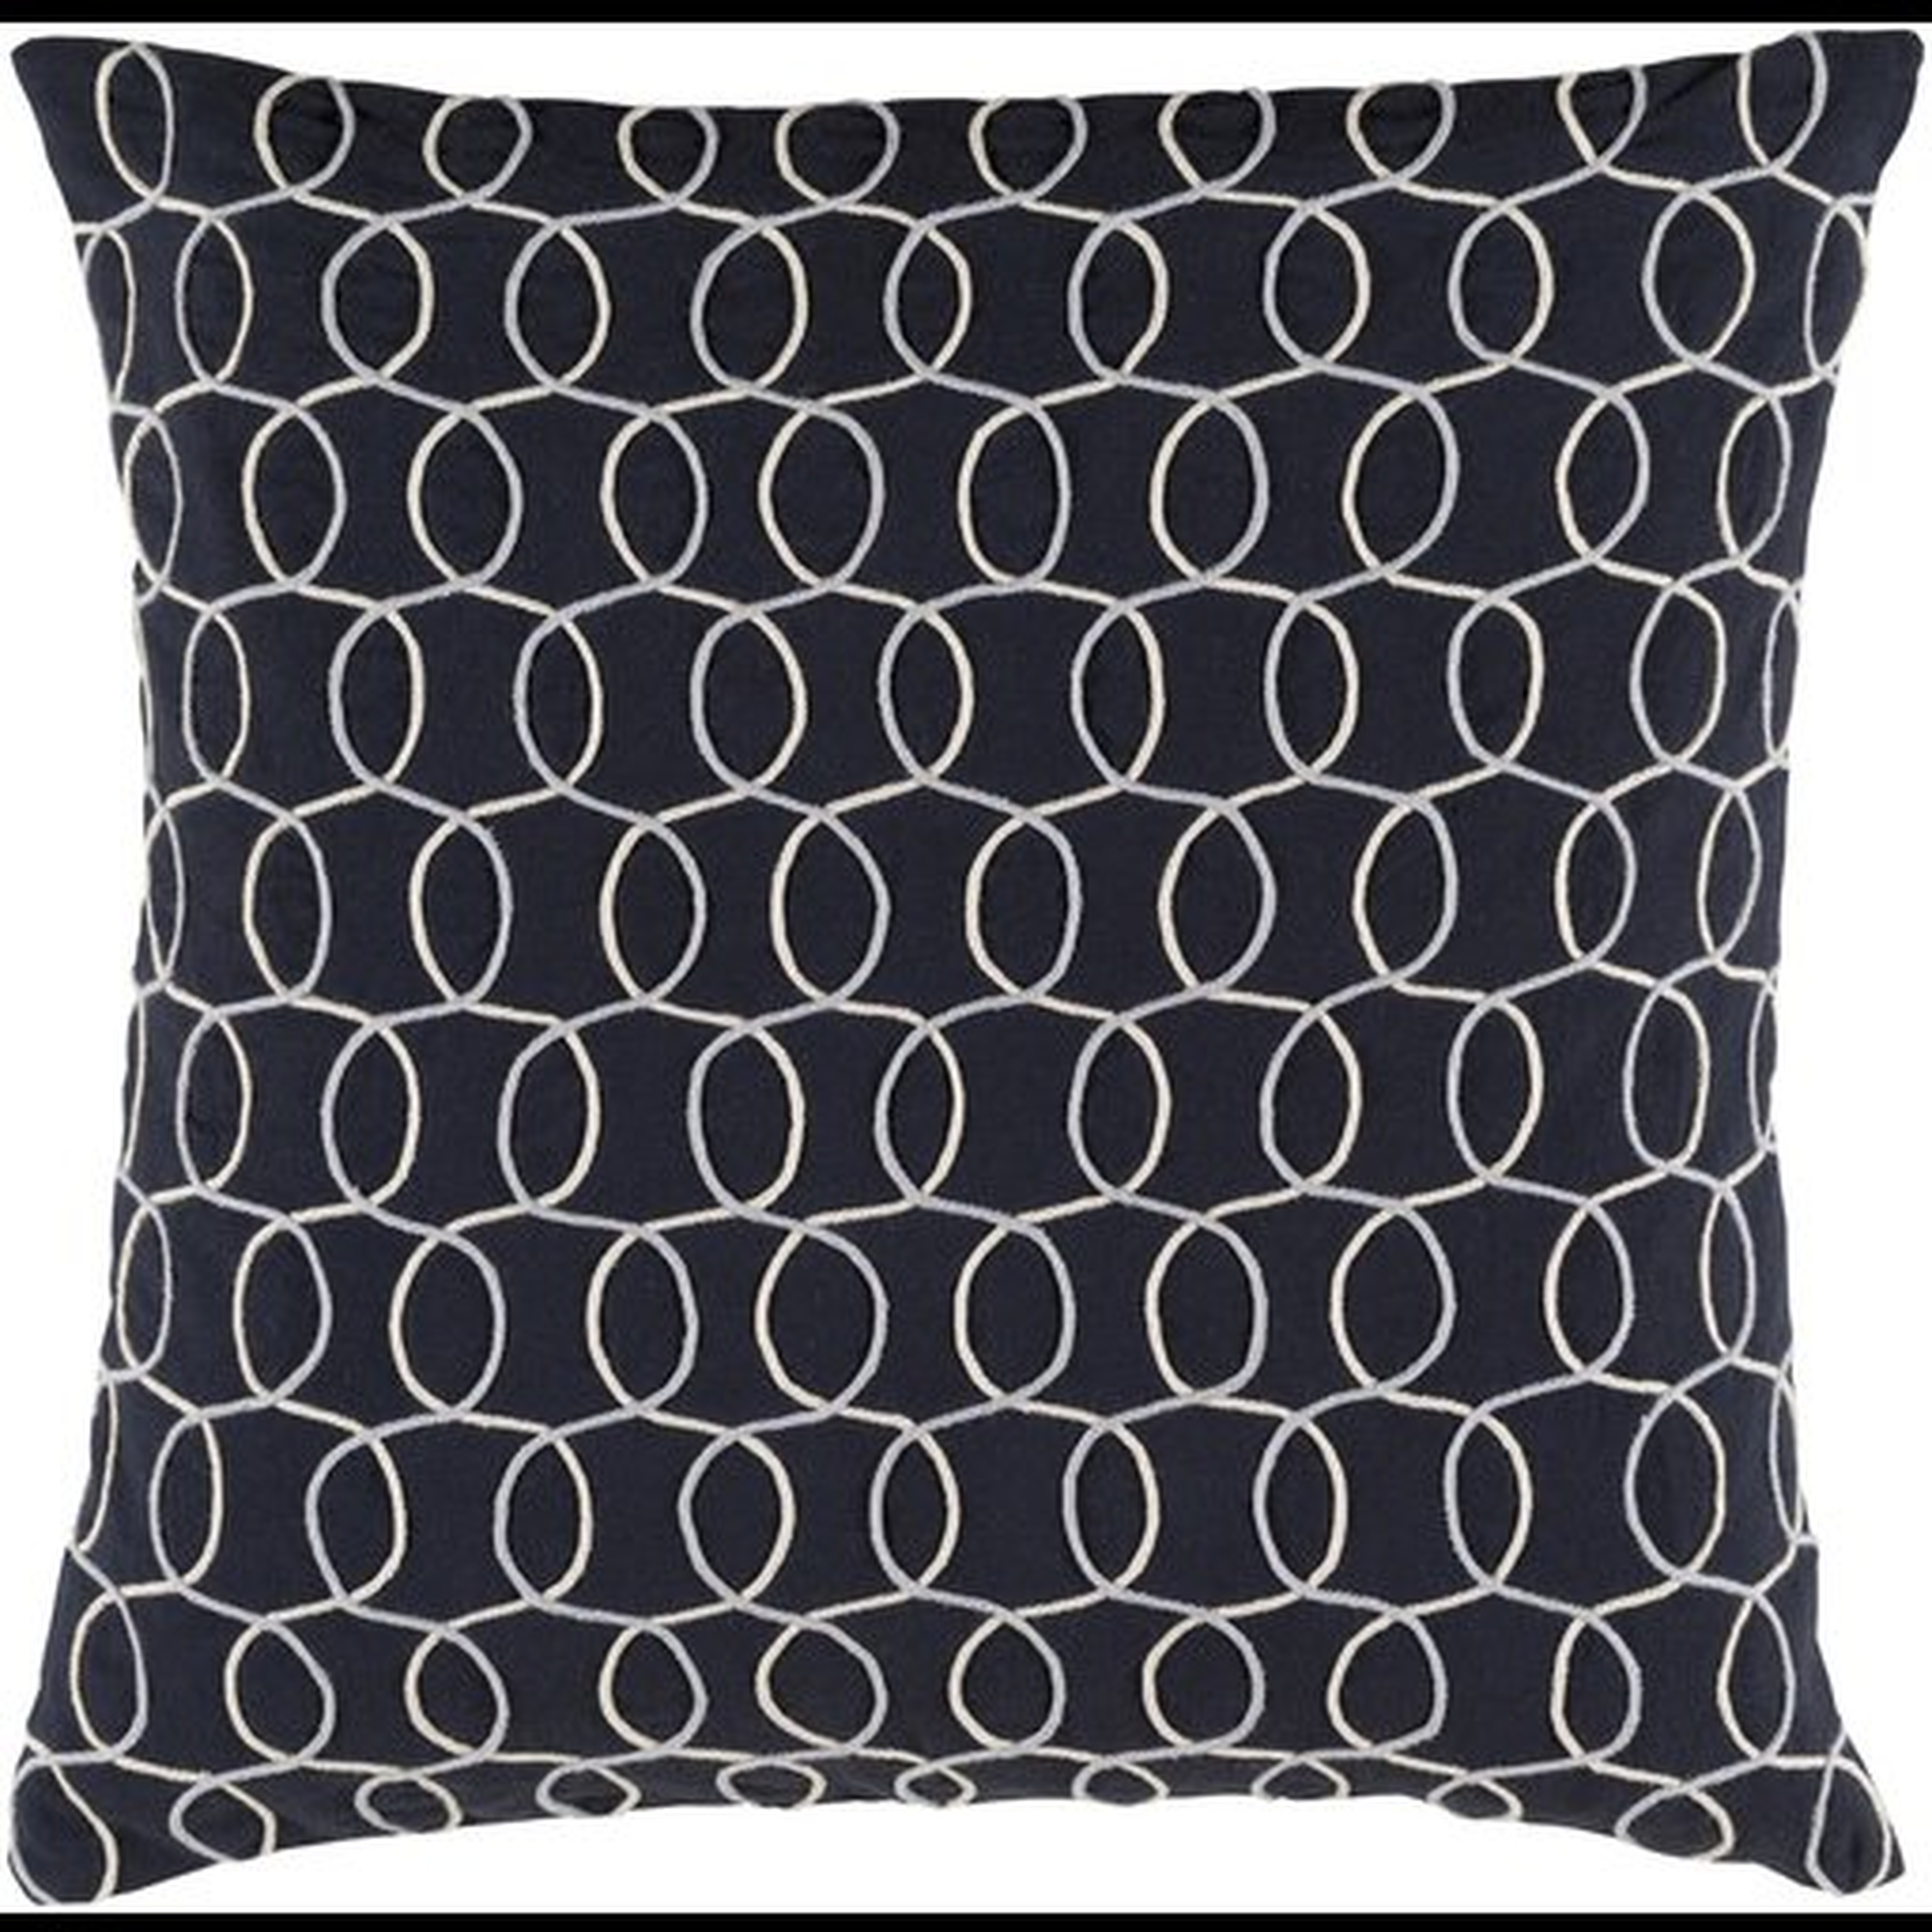 Solid Bold II Throw Pillow, 18" x 18", with down insert - Surya